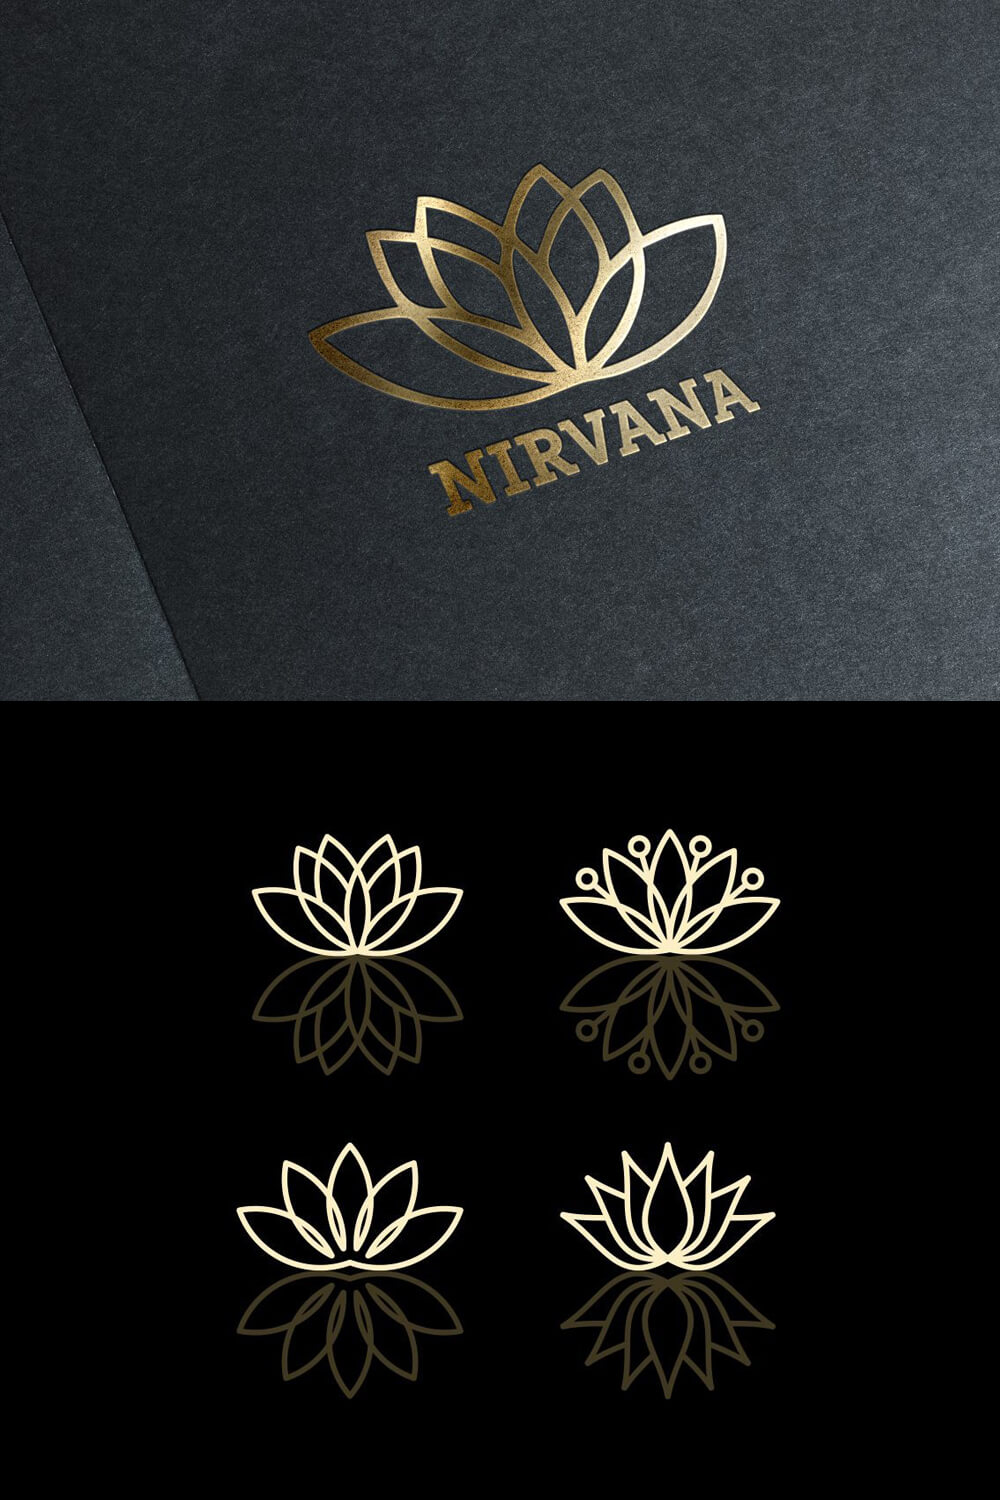 Two versions of the lotus logo on gray and black backgrounds.